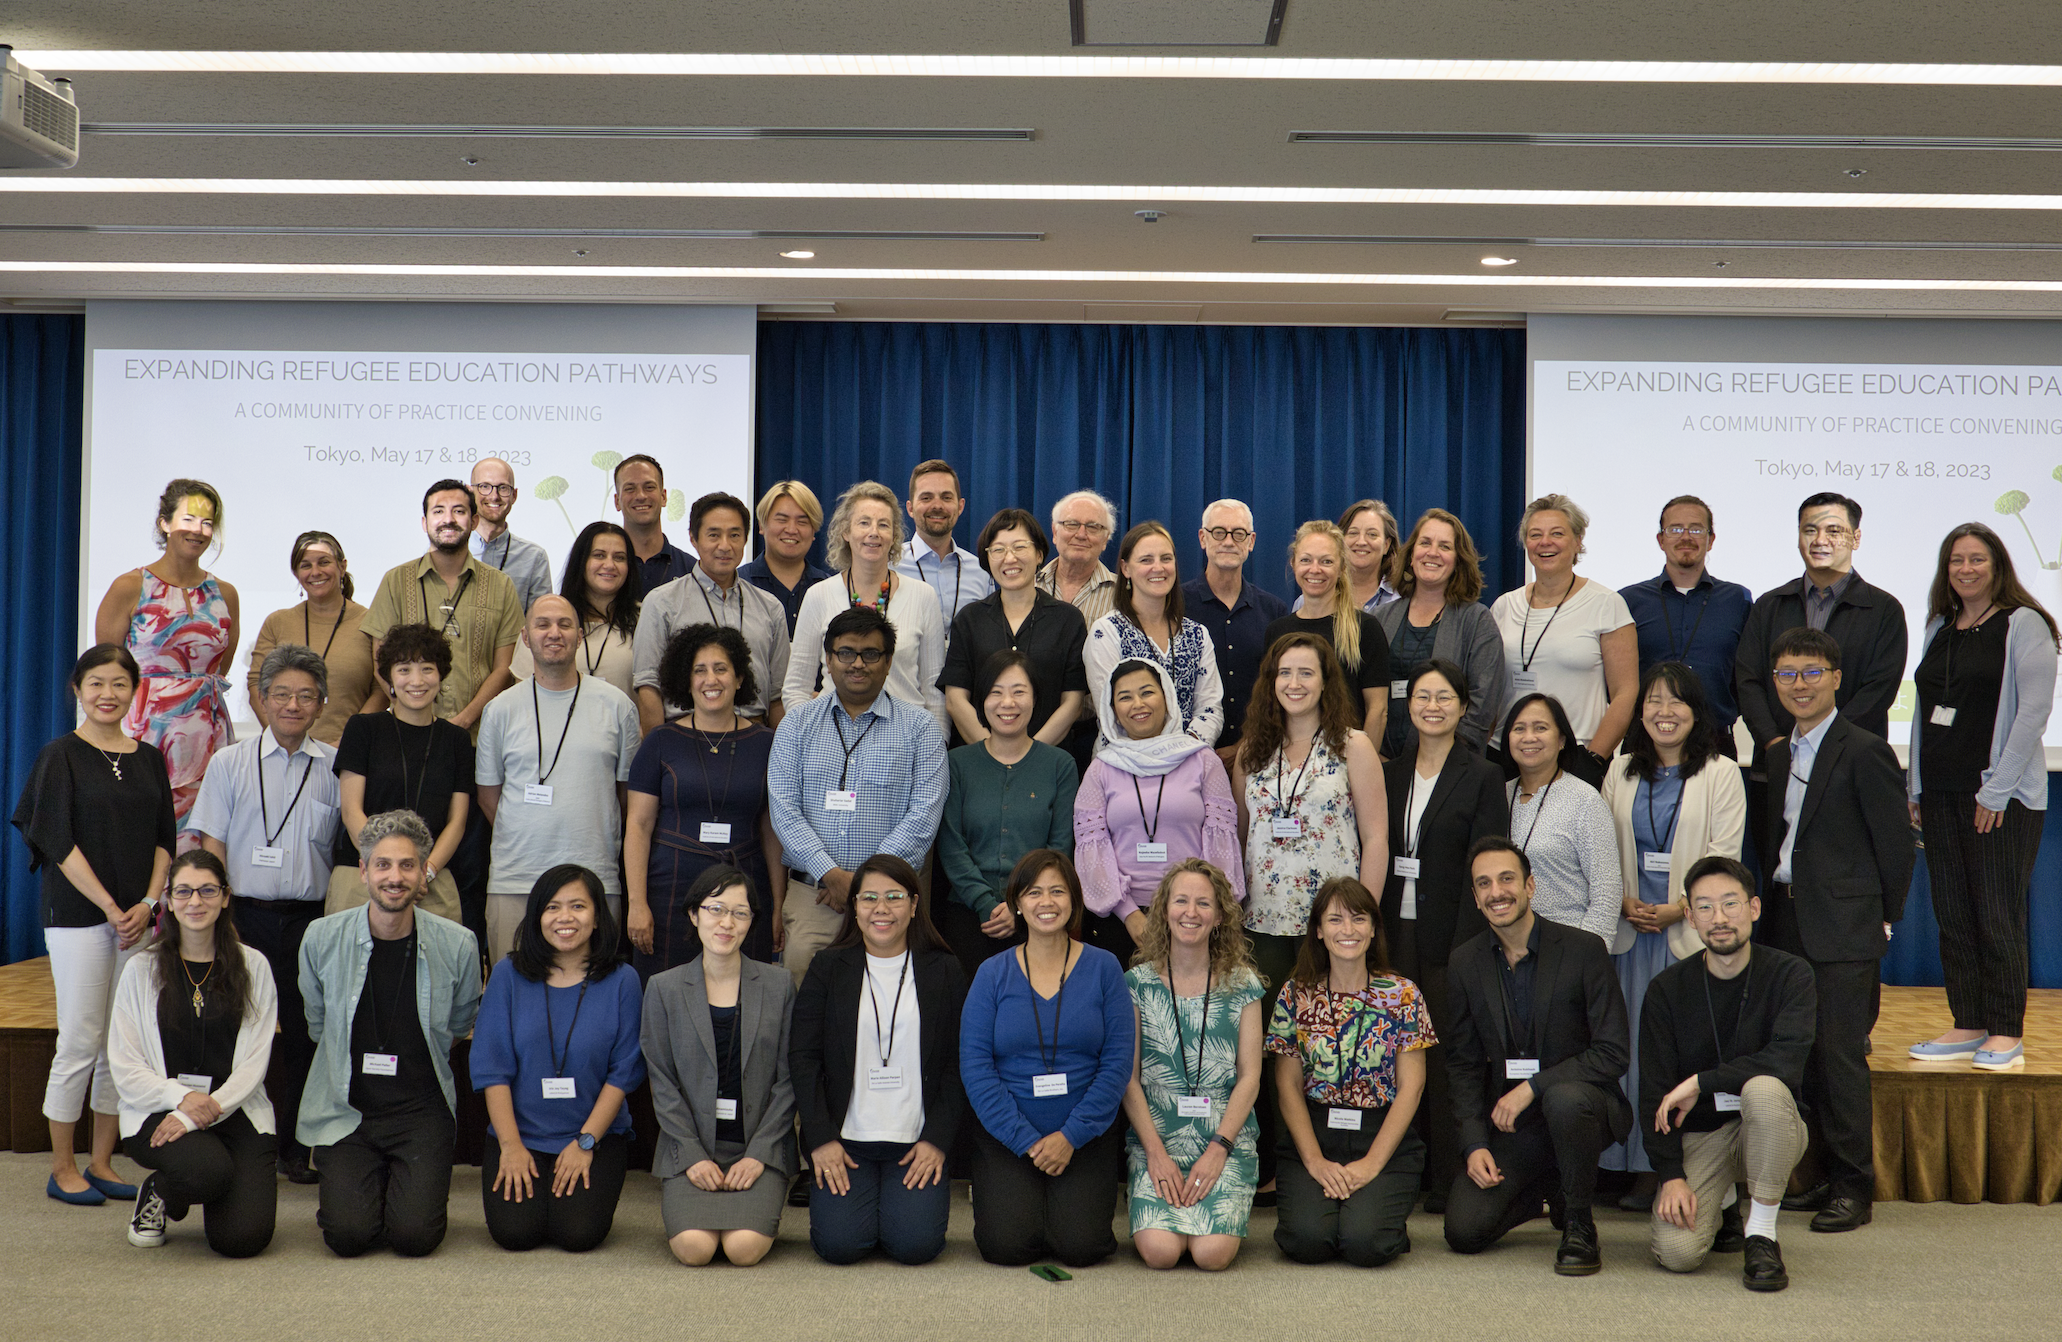 OSUN Hubs for Connected Learning Attends Global Task Force on Third Country Education Pathways Convening in Japan